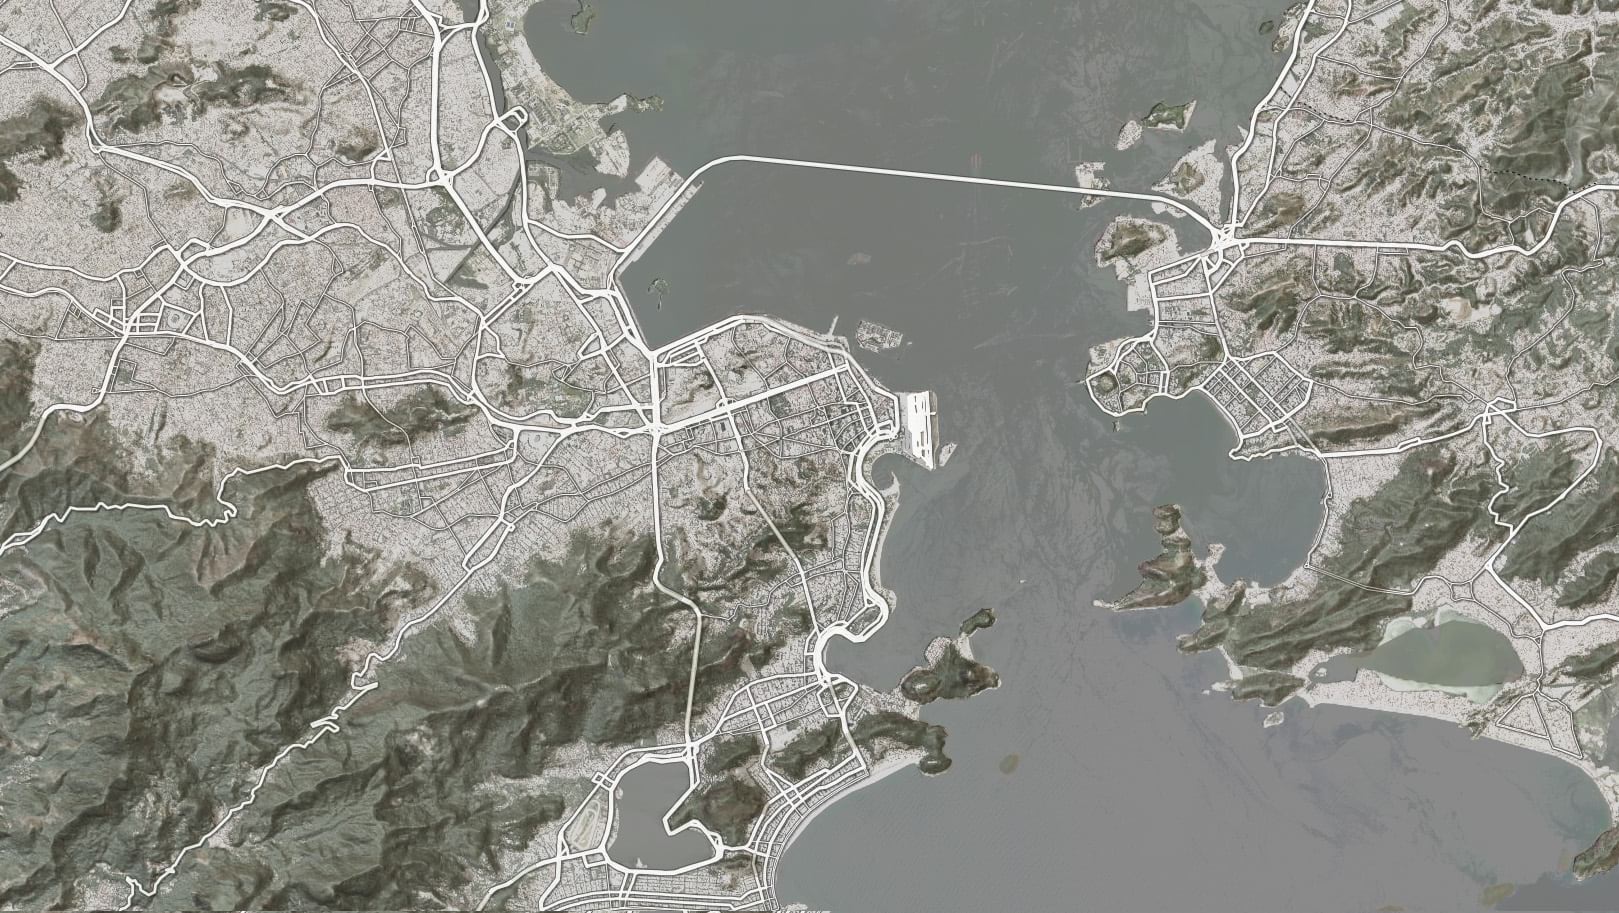 RIo Combined imagery/hillshade, with the Human Geography Detail layer